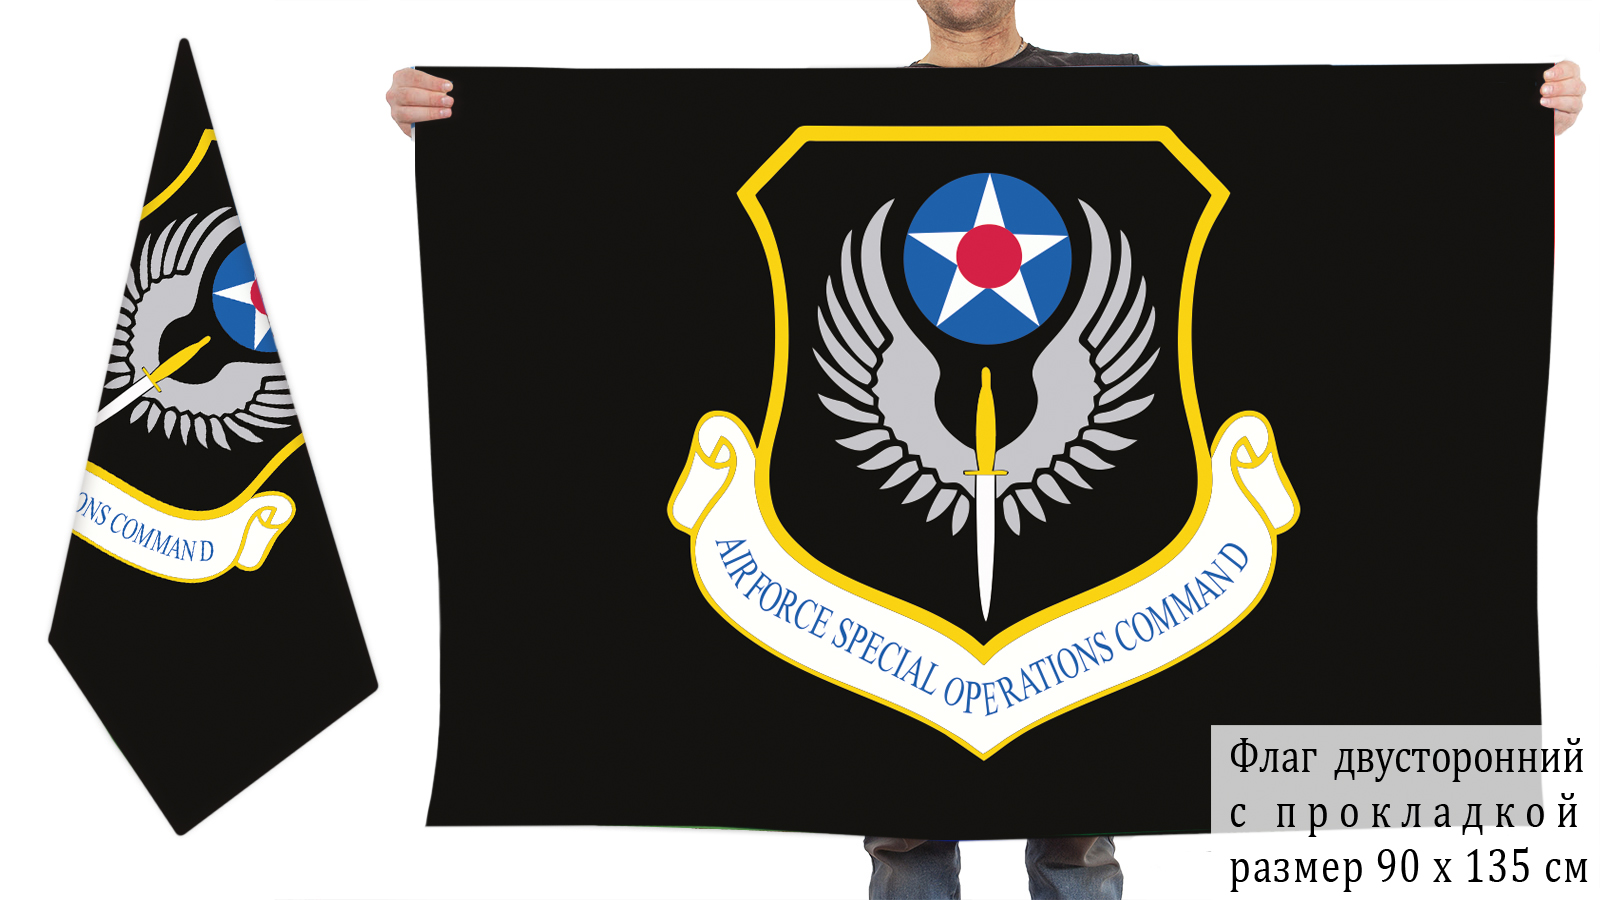 Bilateral flag of the United States Air Force Special Forces